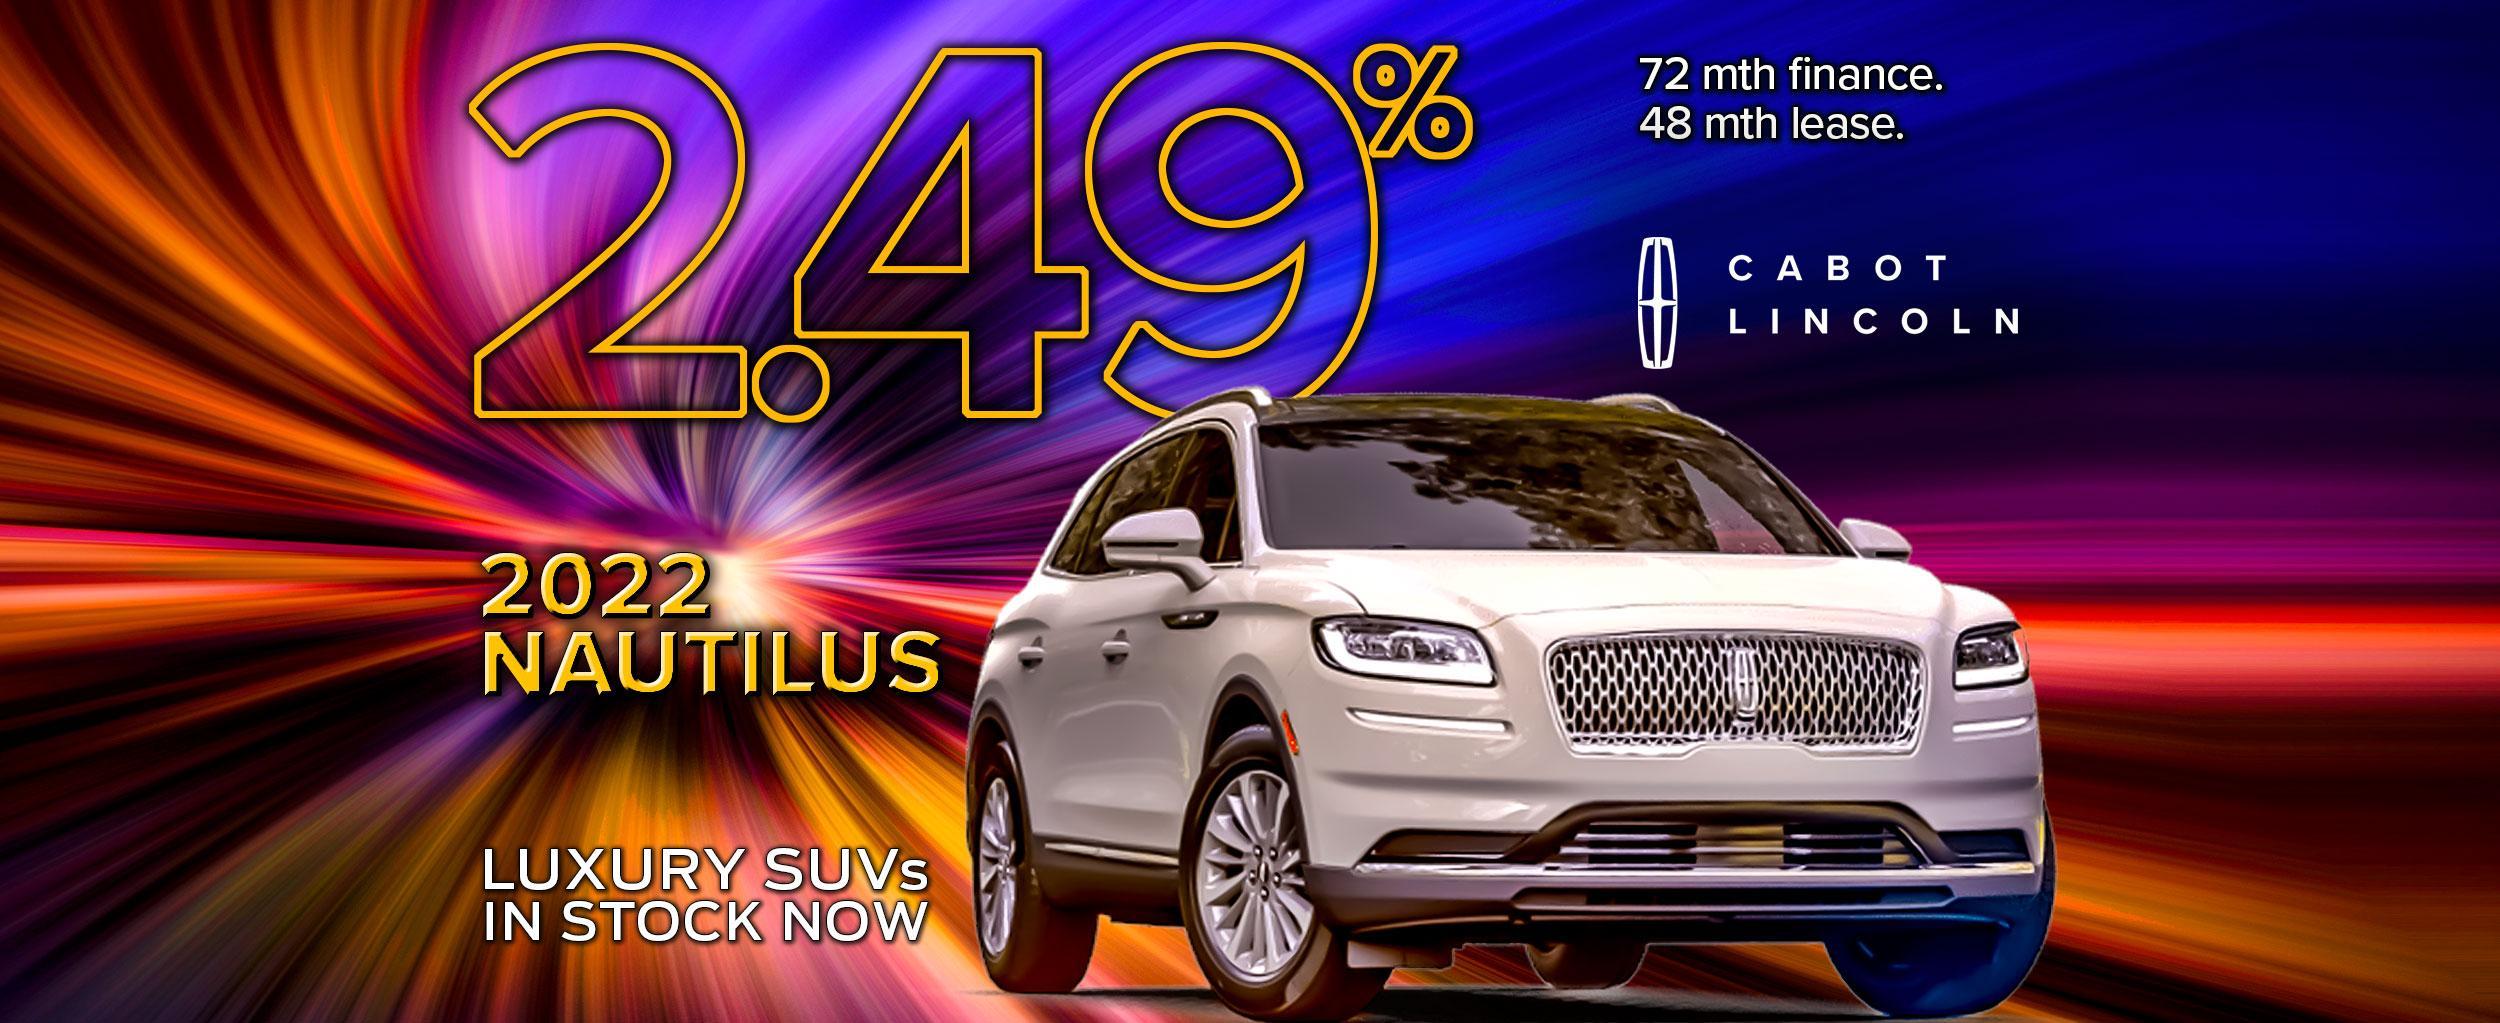 Purchase or lease a luxury Lincoln Nautilus with APR as low as 2.49%!